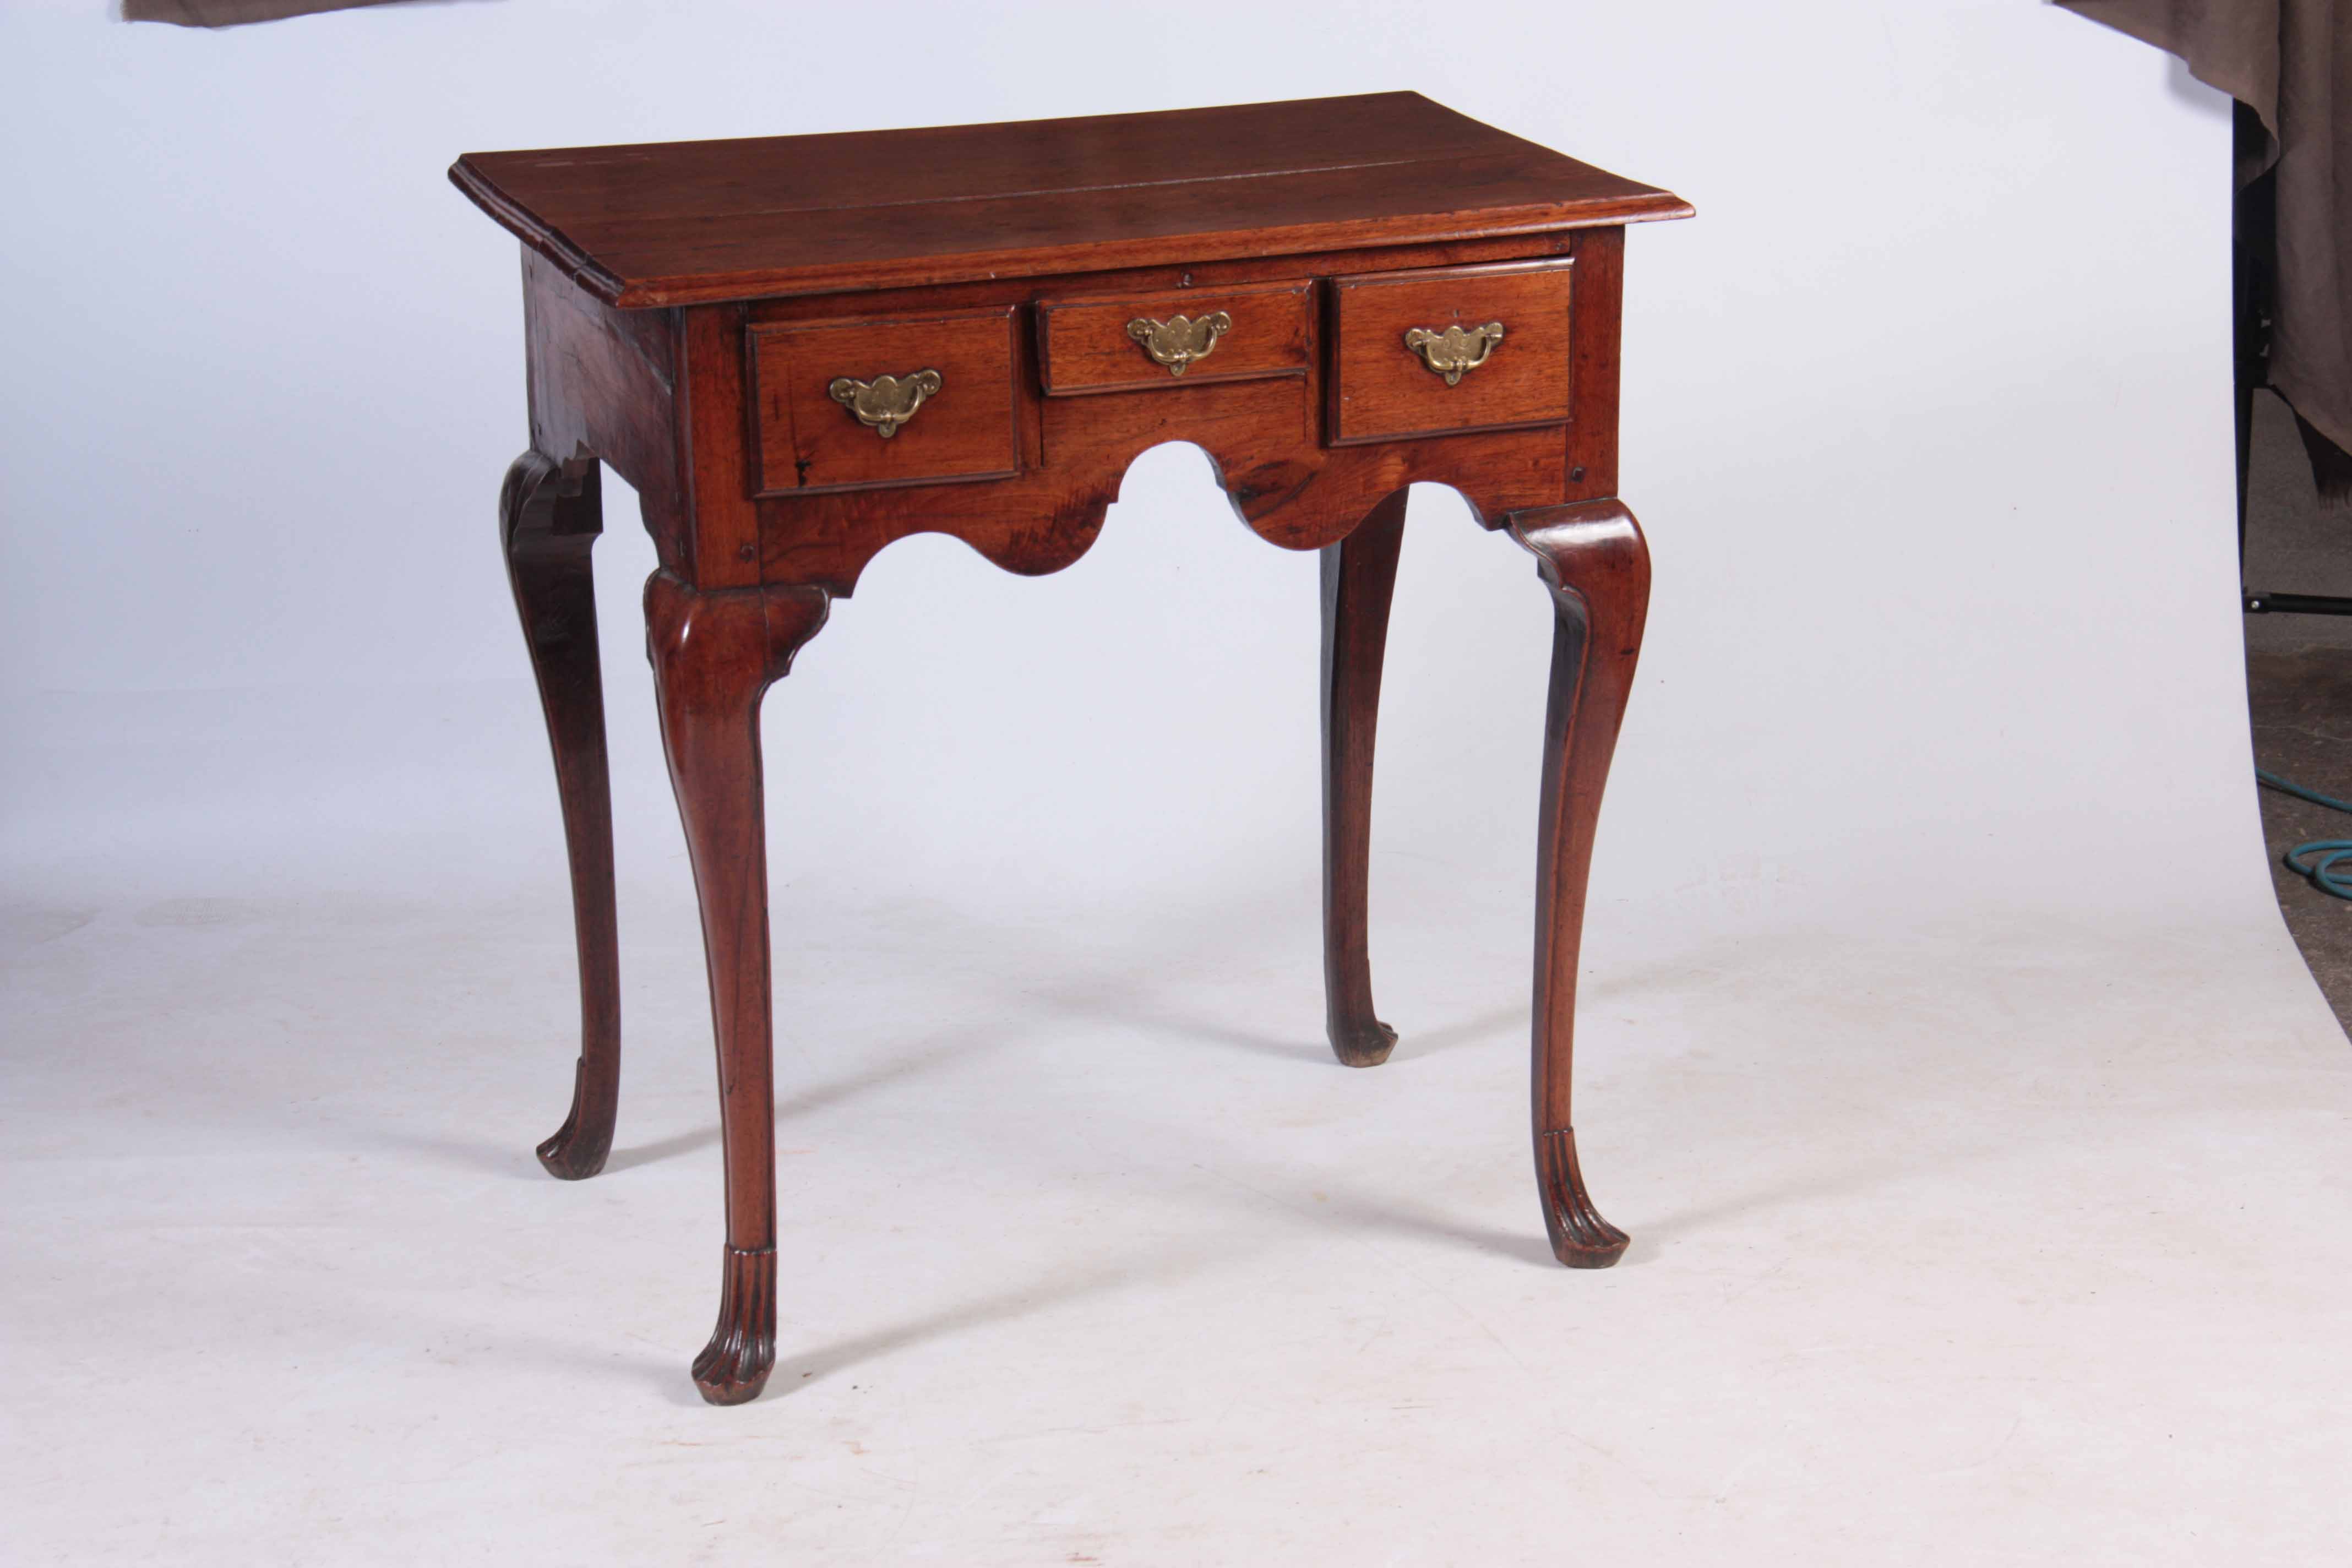 AN UNUSUAL SOLID WALNUT EARLY 18TH CENTURY LOWBOY POSSIBLY AMERICAN with moulded edge top above - Image 2 of 8